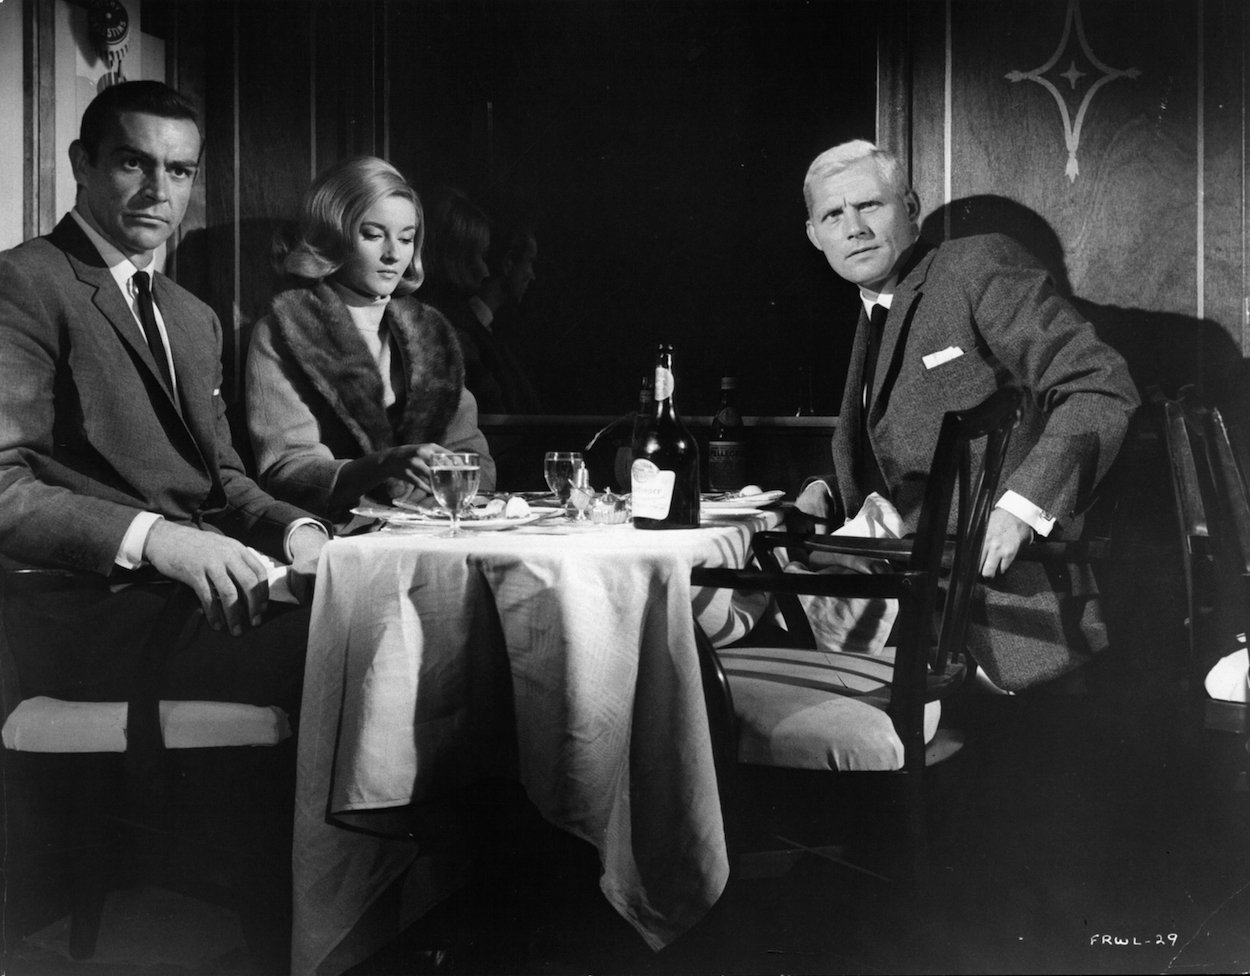 Daniela Bianchi, Sean Connery, and Robert Shaw sitting at a table in the film 'From Russia With Love.' Connery's performance in 'From Russia With Love' was so good, James Bond author Ian Fleming changed the character forever.